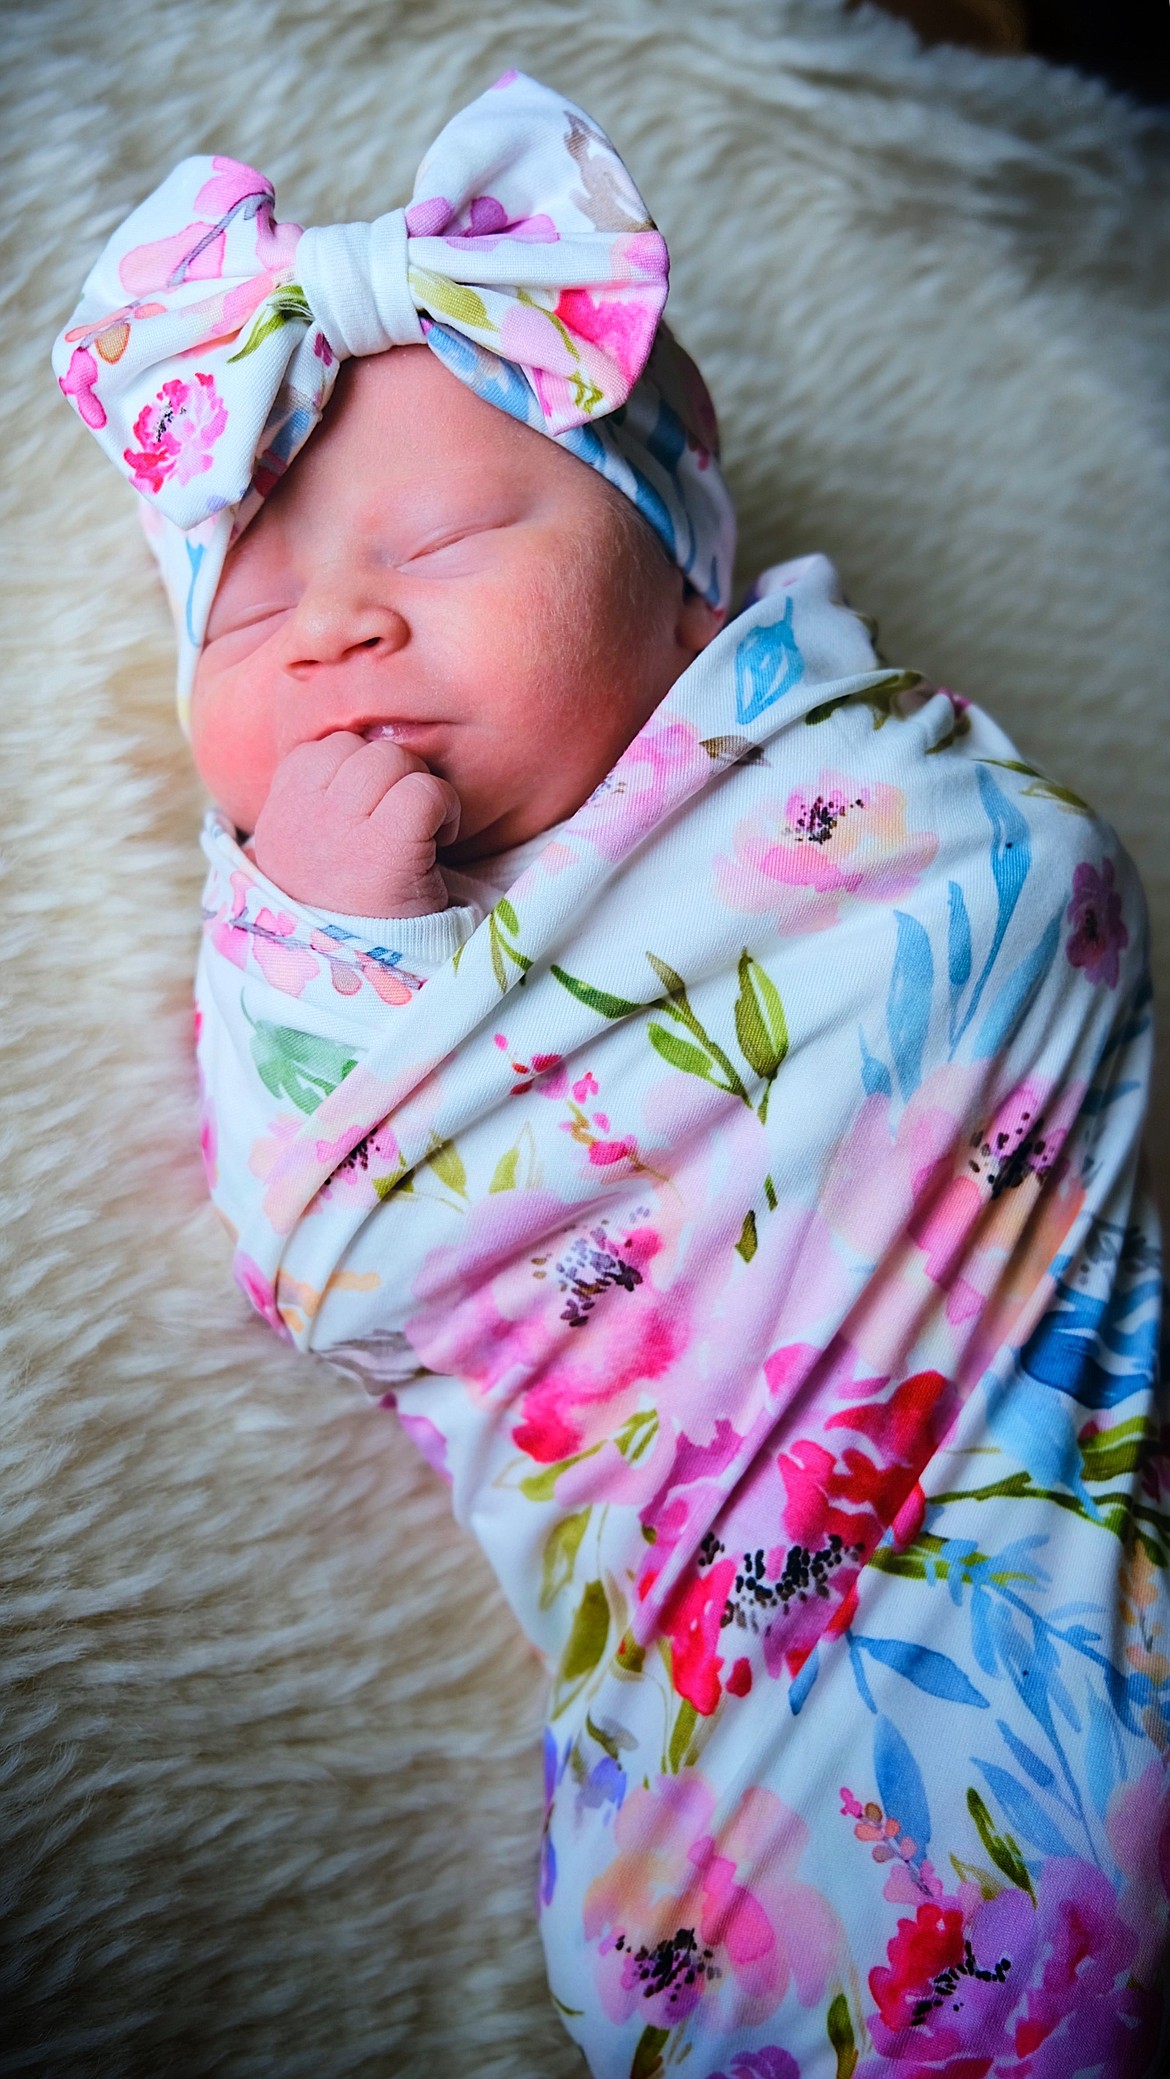 Miami Dawn Radcliff was born May 25th, 2022 at the St. Luke New Beginnings Birth Center. She weighed 6 lbs. 4 oz. Parents are Edward and Alisha Radcliff of Ronan. Maternal grandmother is Lisa Brandon of Columbus, Ohio. Miami joins siblings, Annabella, Zariah, Edward Jr., Draven, and Jaxon. Note: This photo is for artistic purposes only and does not necessarily reflect AAP Infant Safe Sleep recommendations.